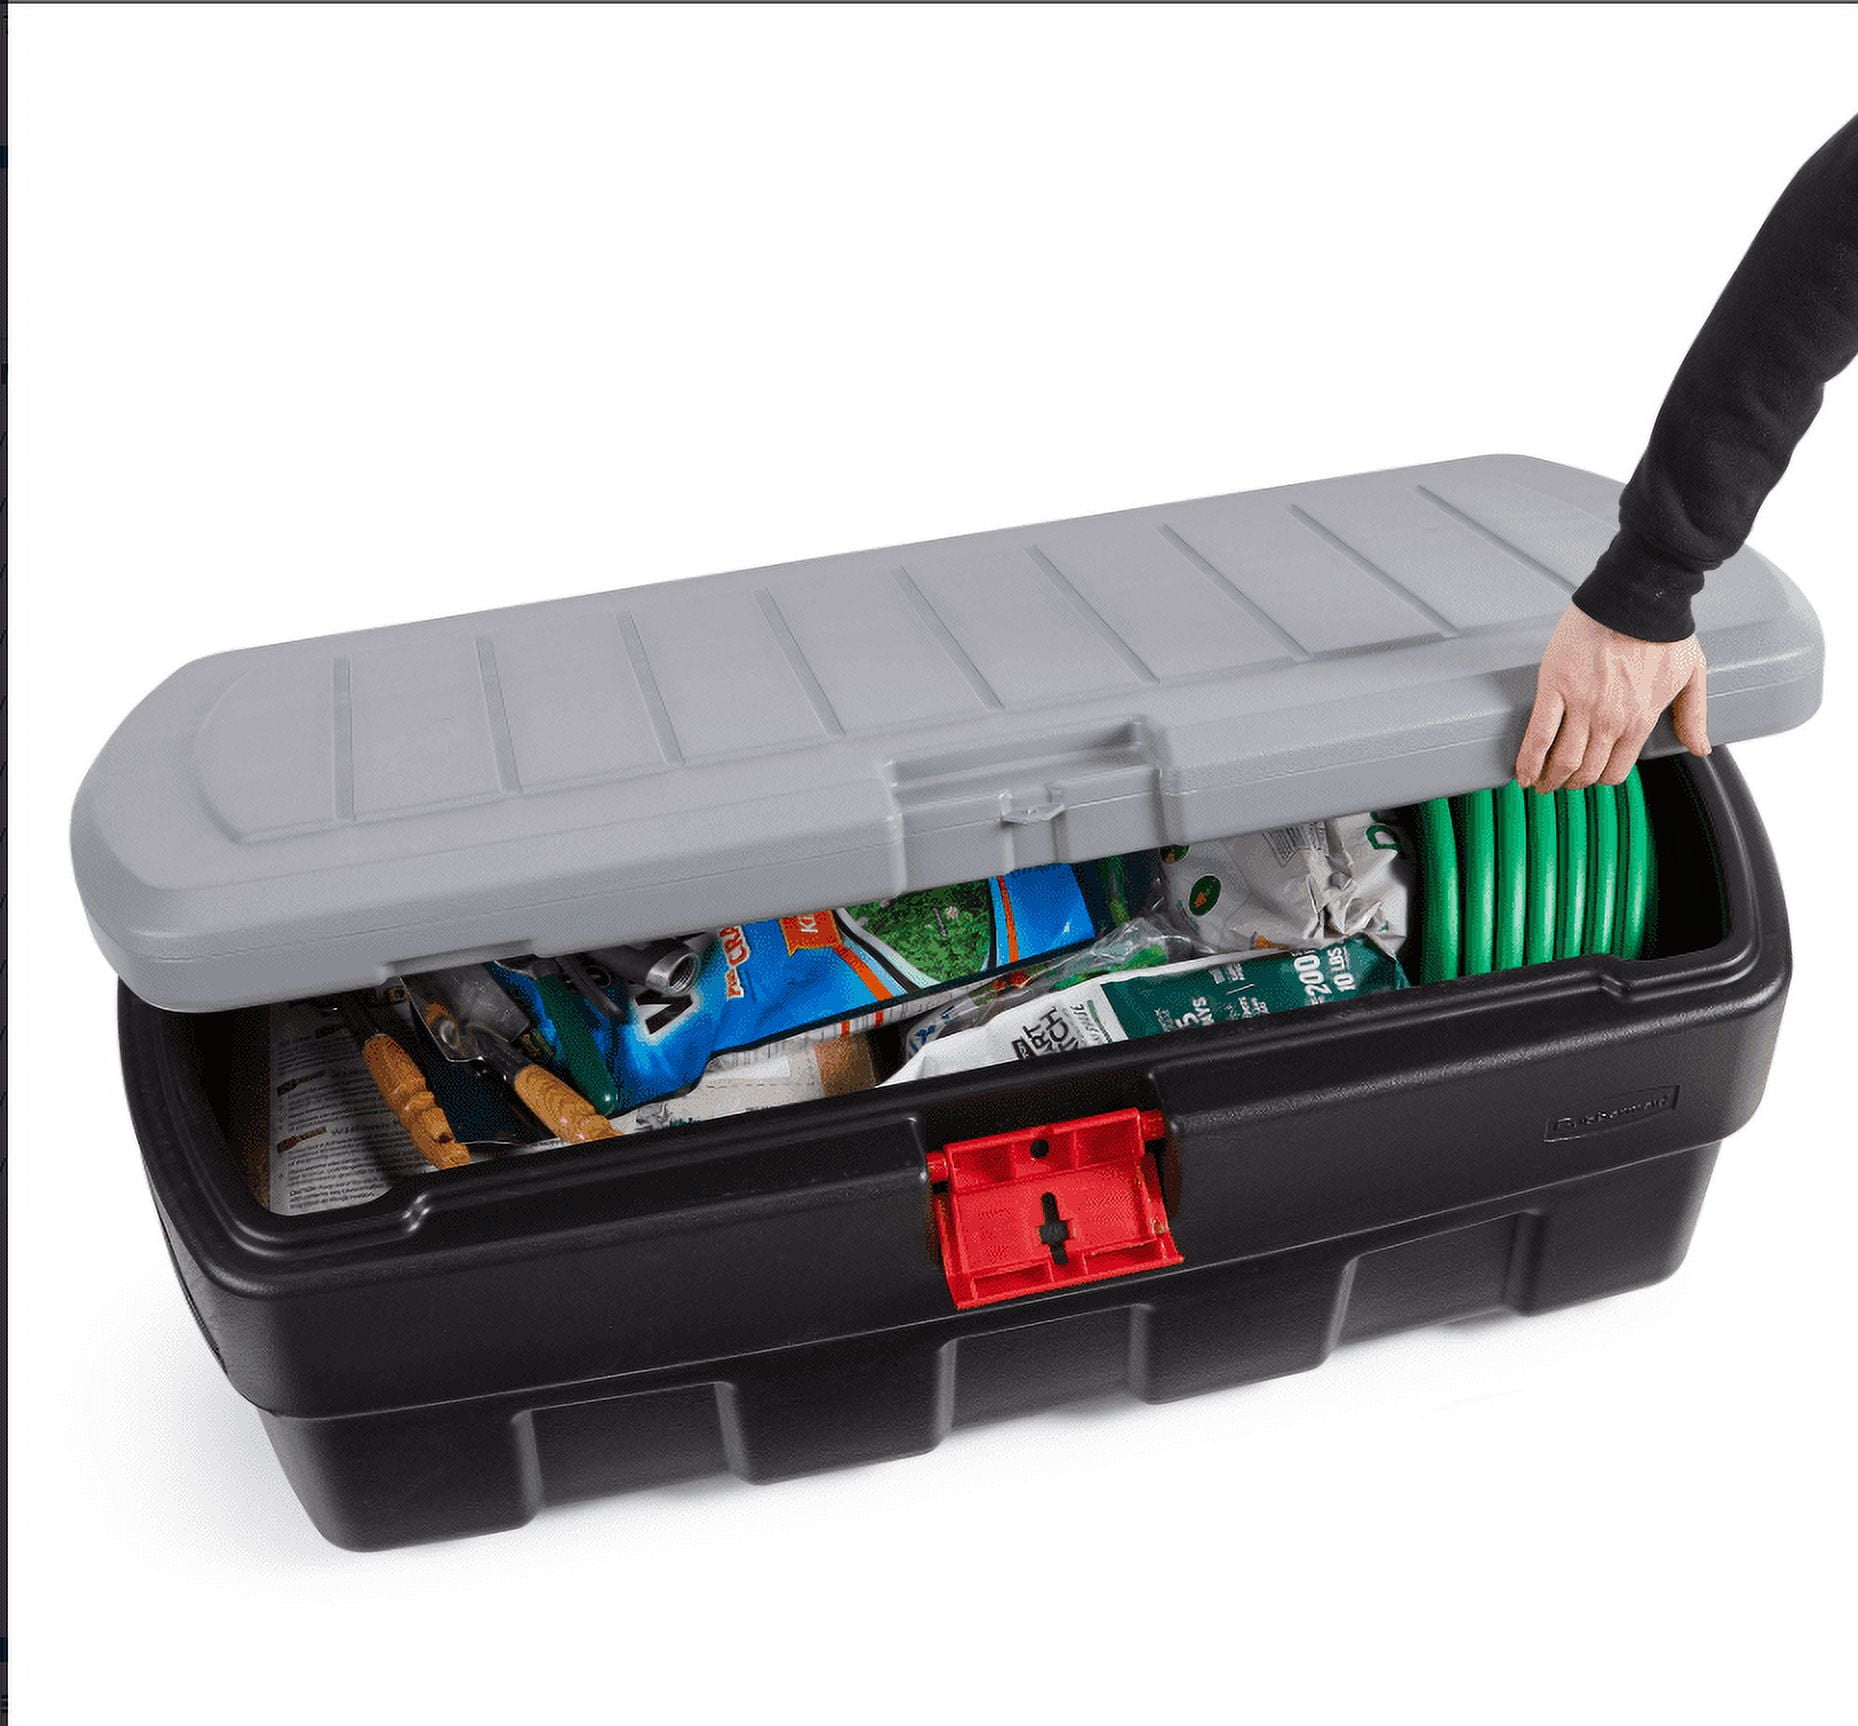 RUBBERMAID 1172 - ActionPacker® Storage Container Type Tool Box